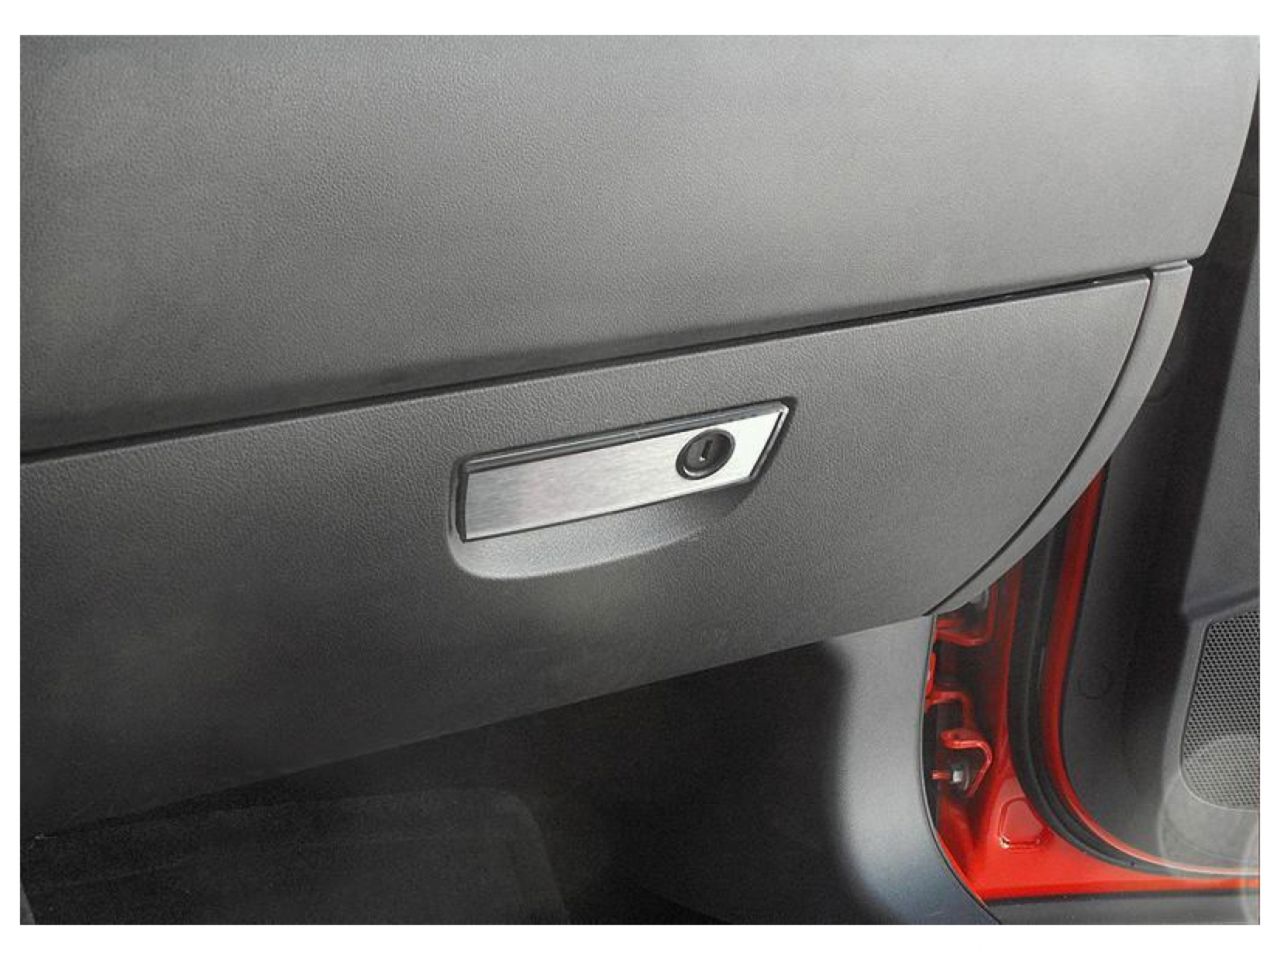 American Car Craft (ACC) 2008-2014 Challenger 5.7 and SRT 8 - Glove Box Trim Plate Brushed